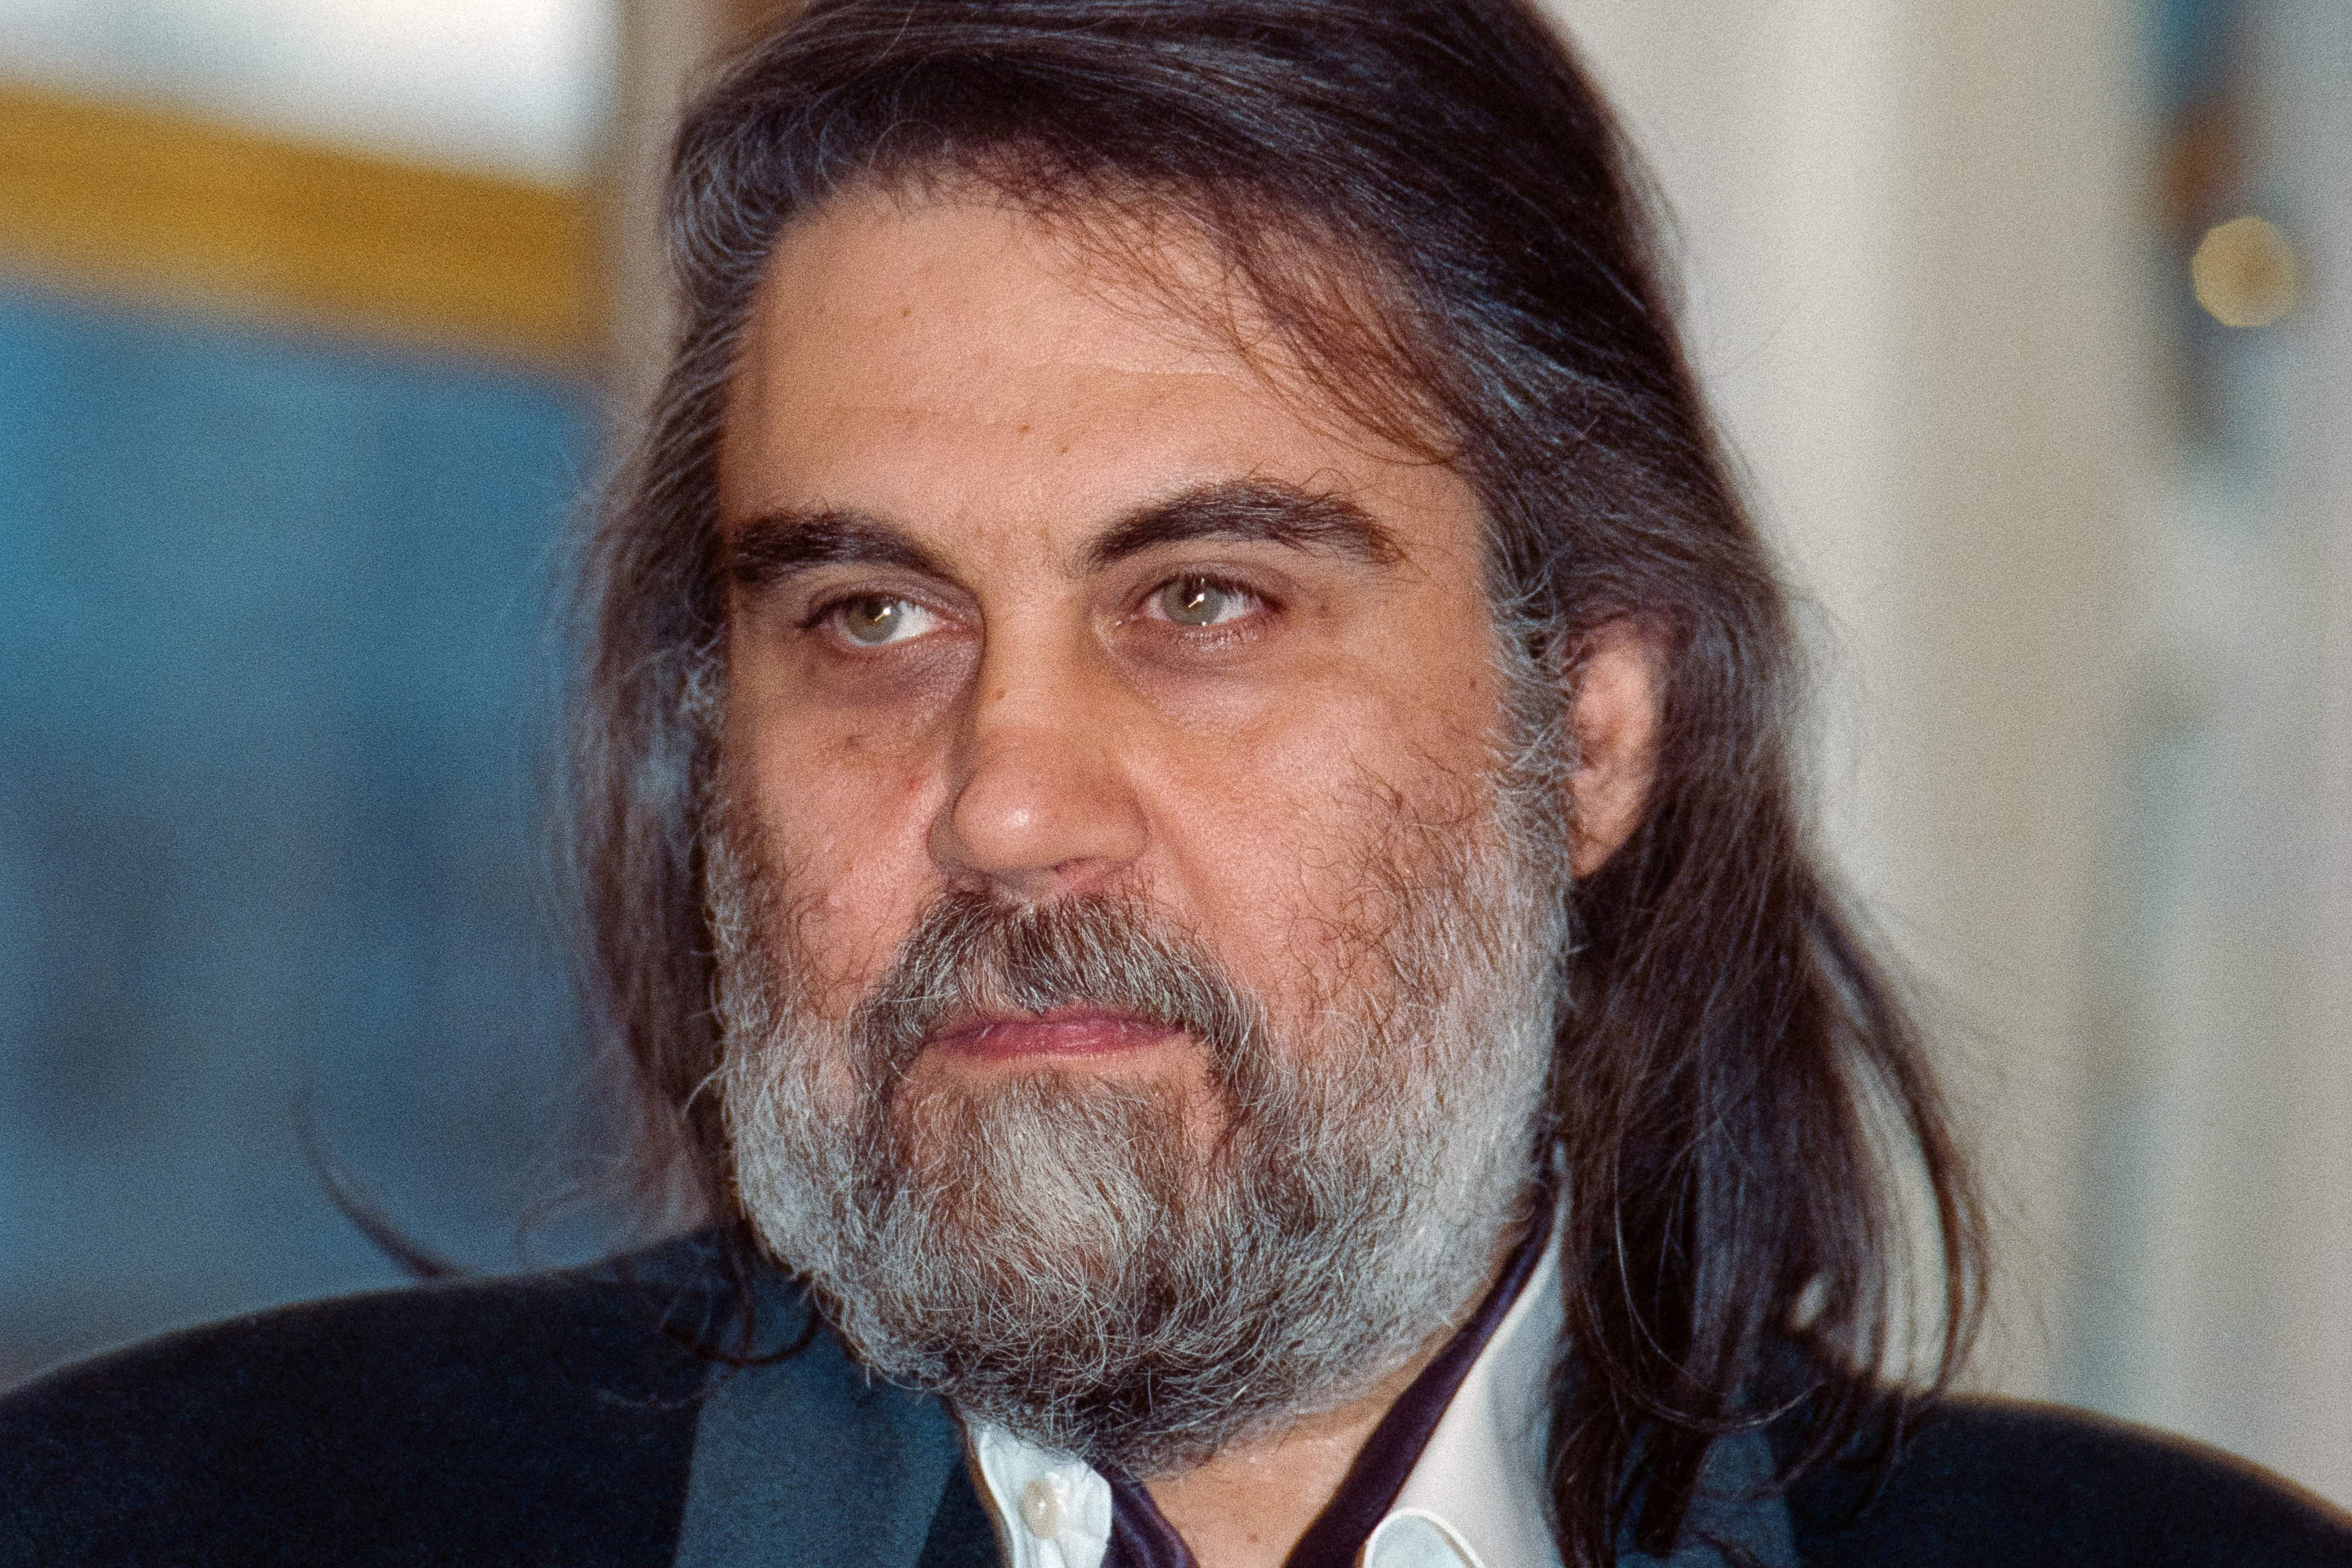 Greek musician and composer, Vangelis Papathanassiou, (Vangelis) at the French Culture Ministry after receiving a decoration, October 20, 1992  | Source: Getty Images